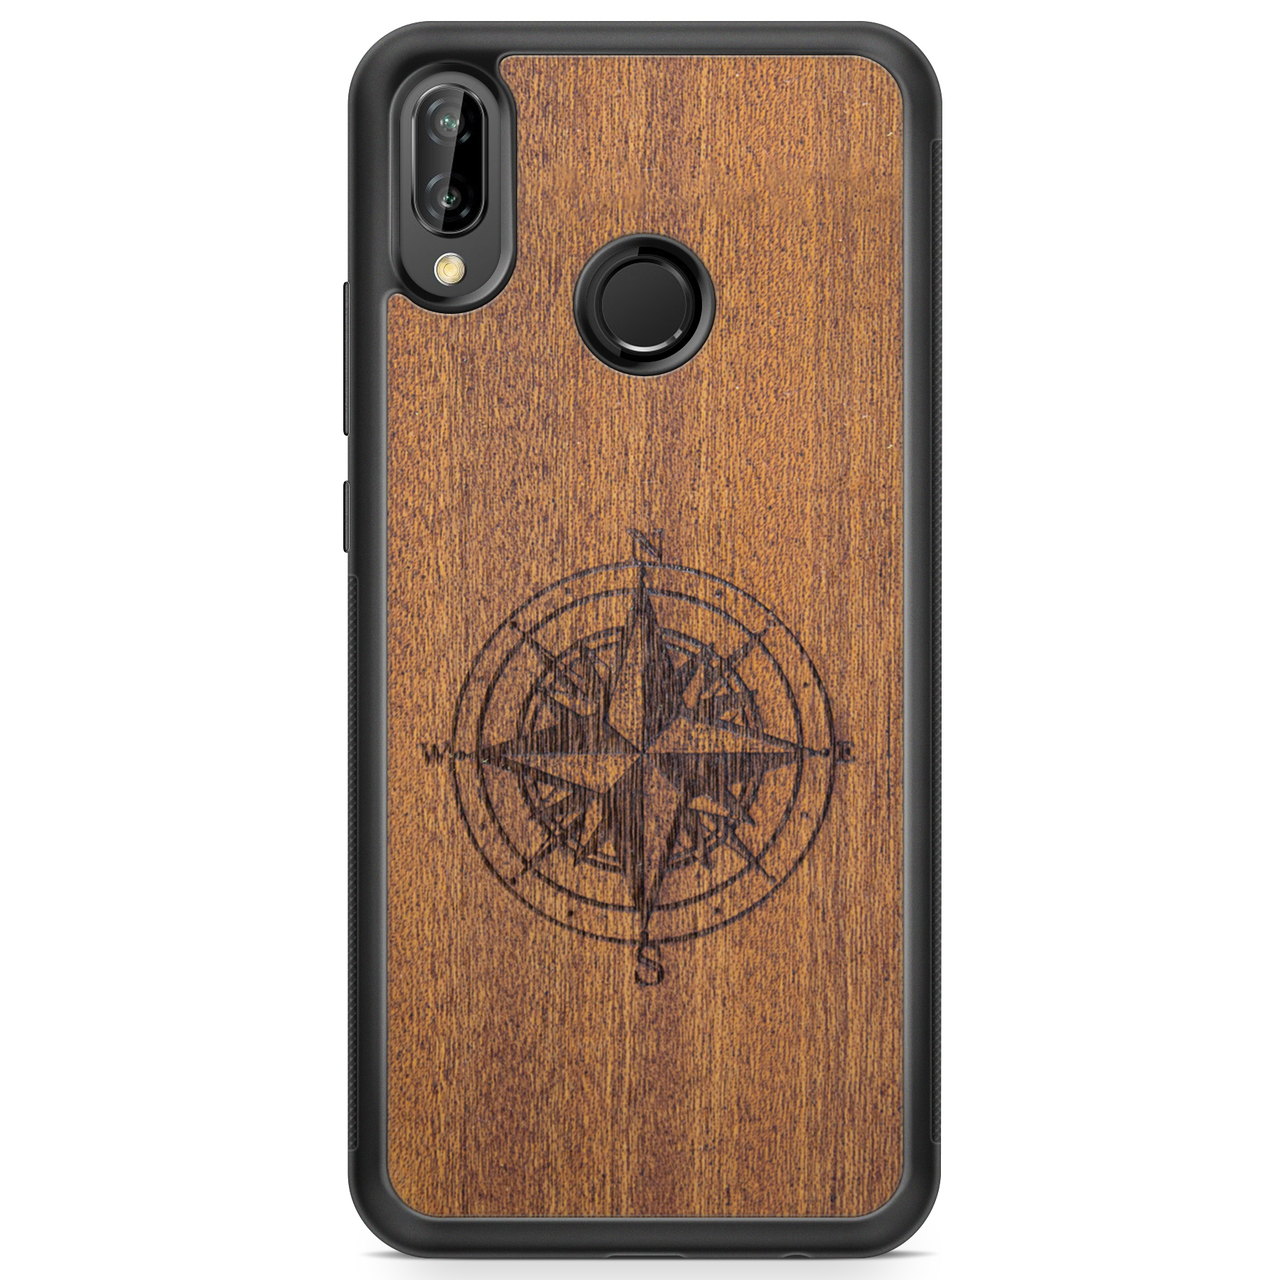 Real Engraved Wood Phone Case with Compass design for Huawei P20 PRO in Black Colour made from Mahogany woodCompass Wood Phone Case Huawei P20 Lite